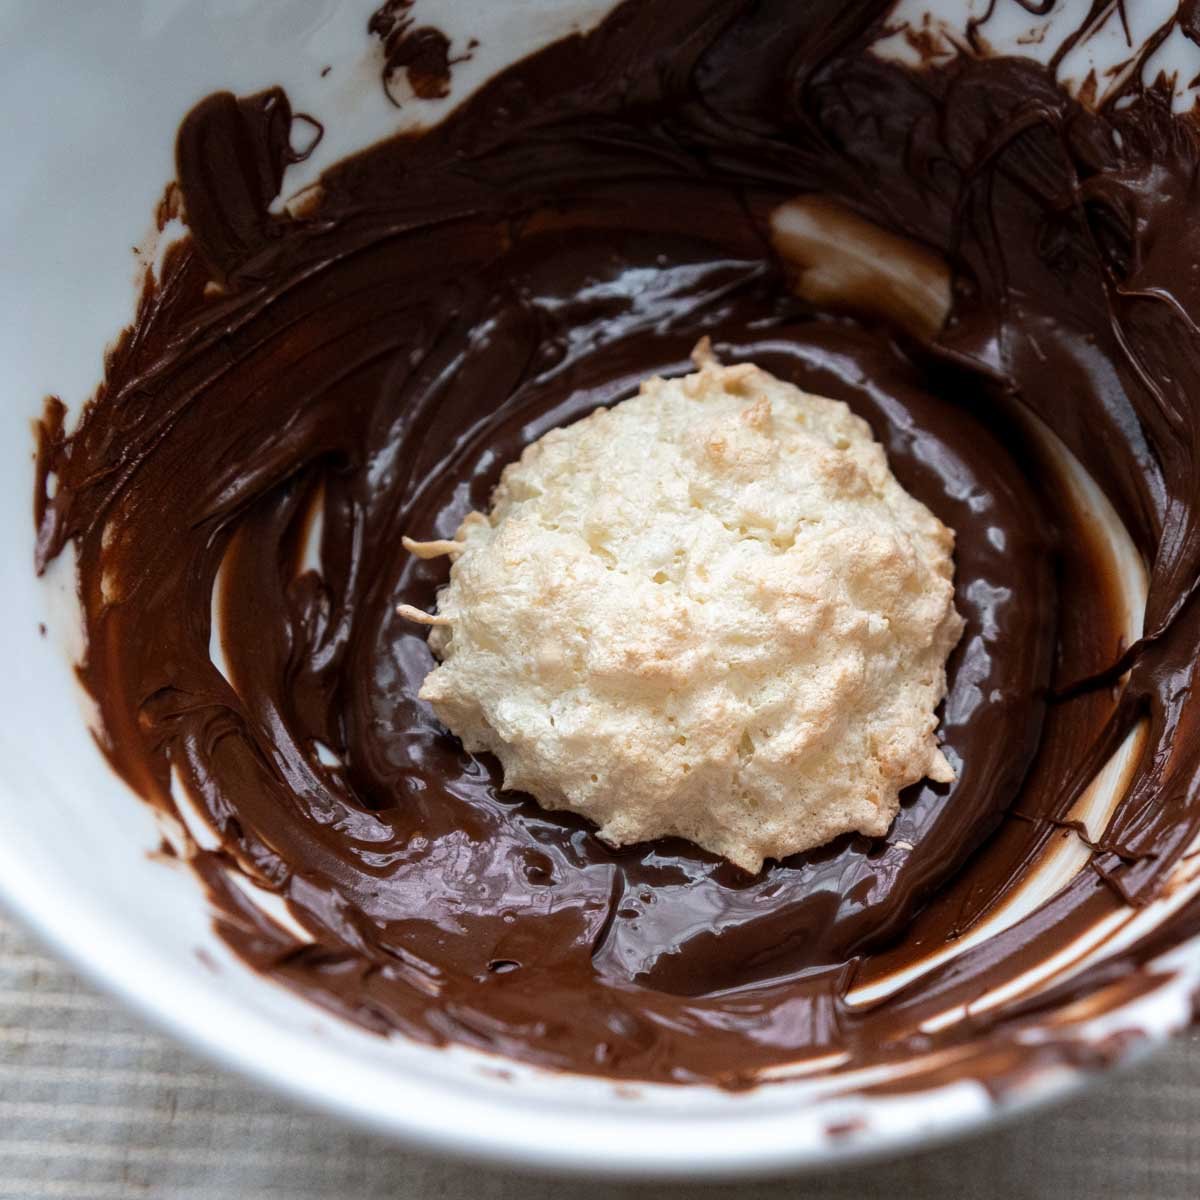 macaroon in a bowl of chocolate.